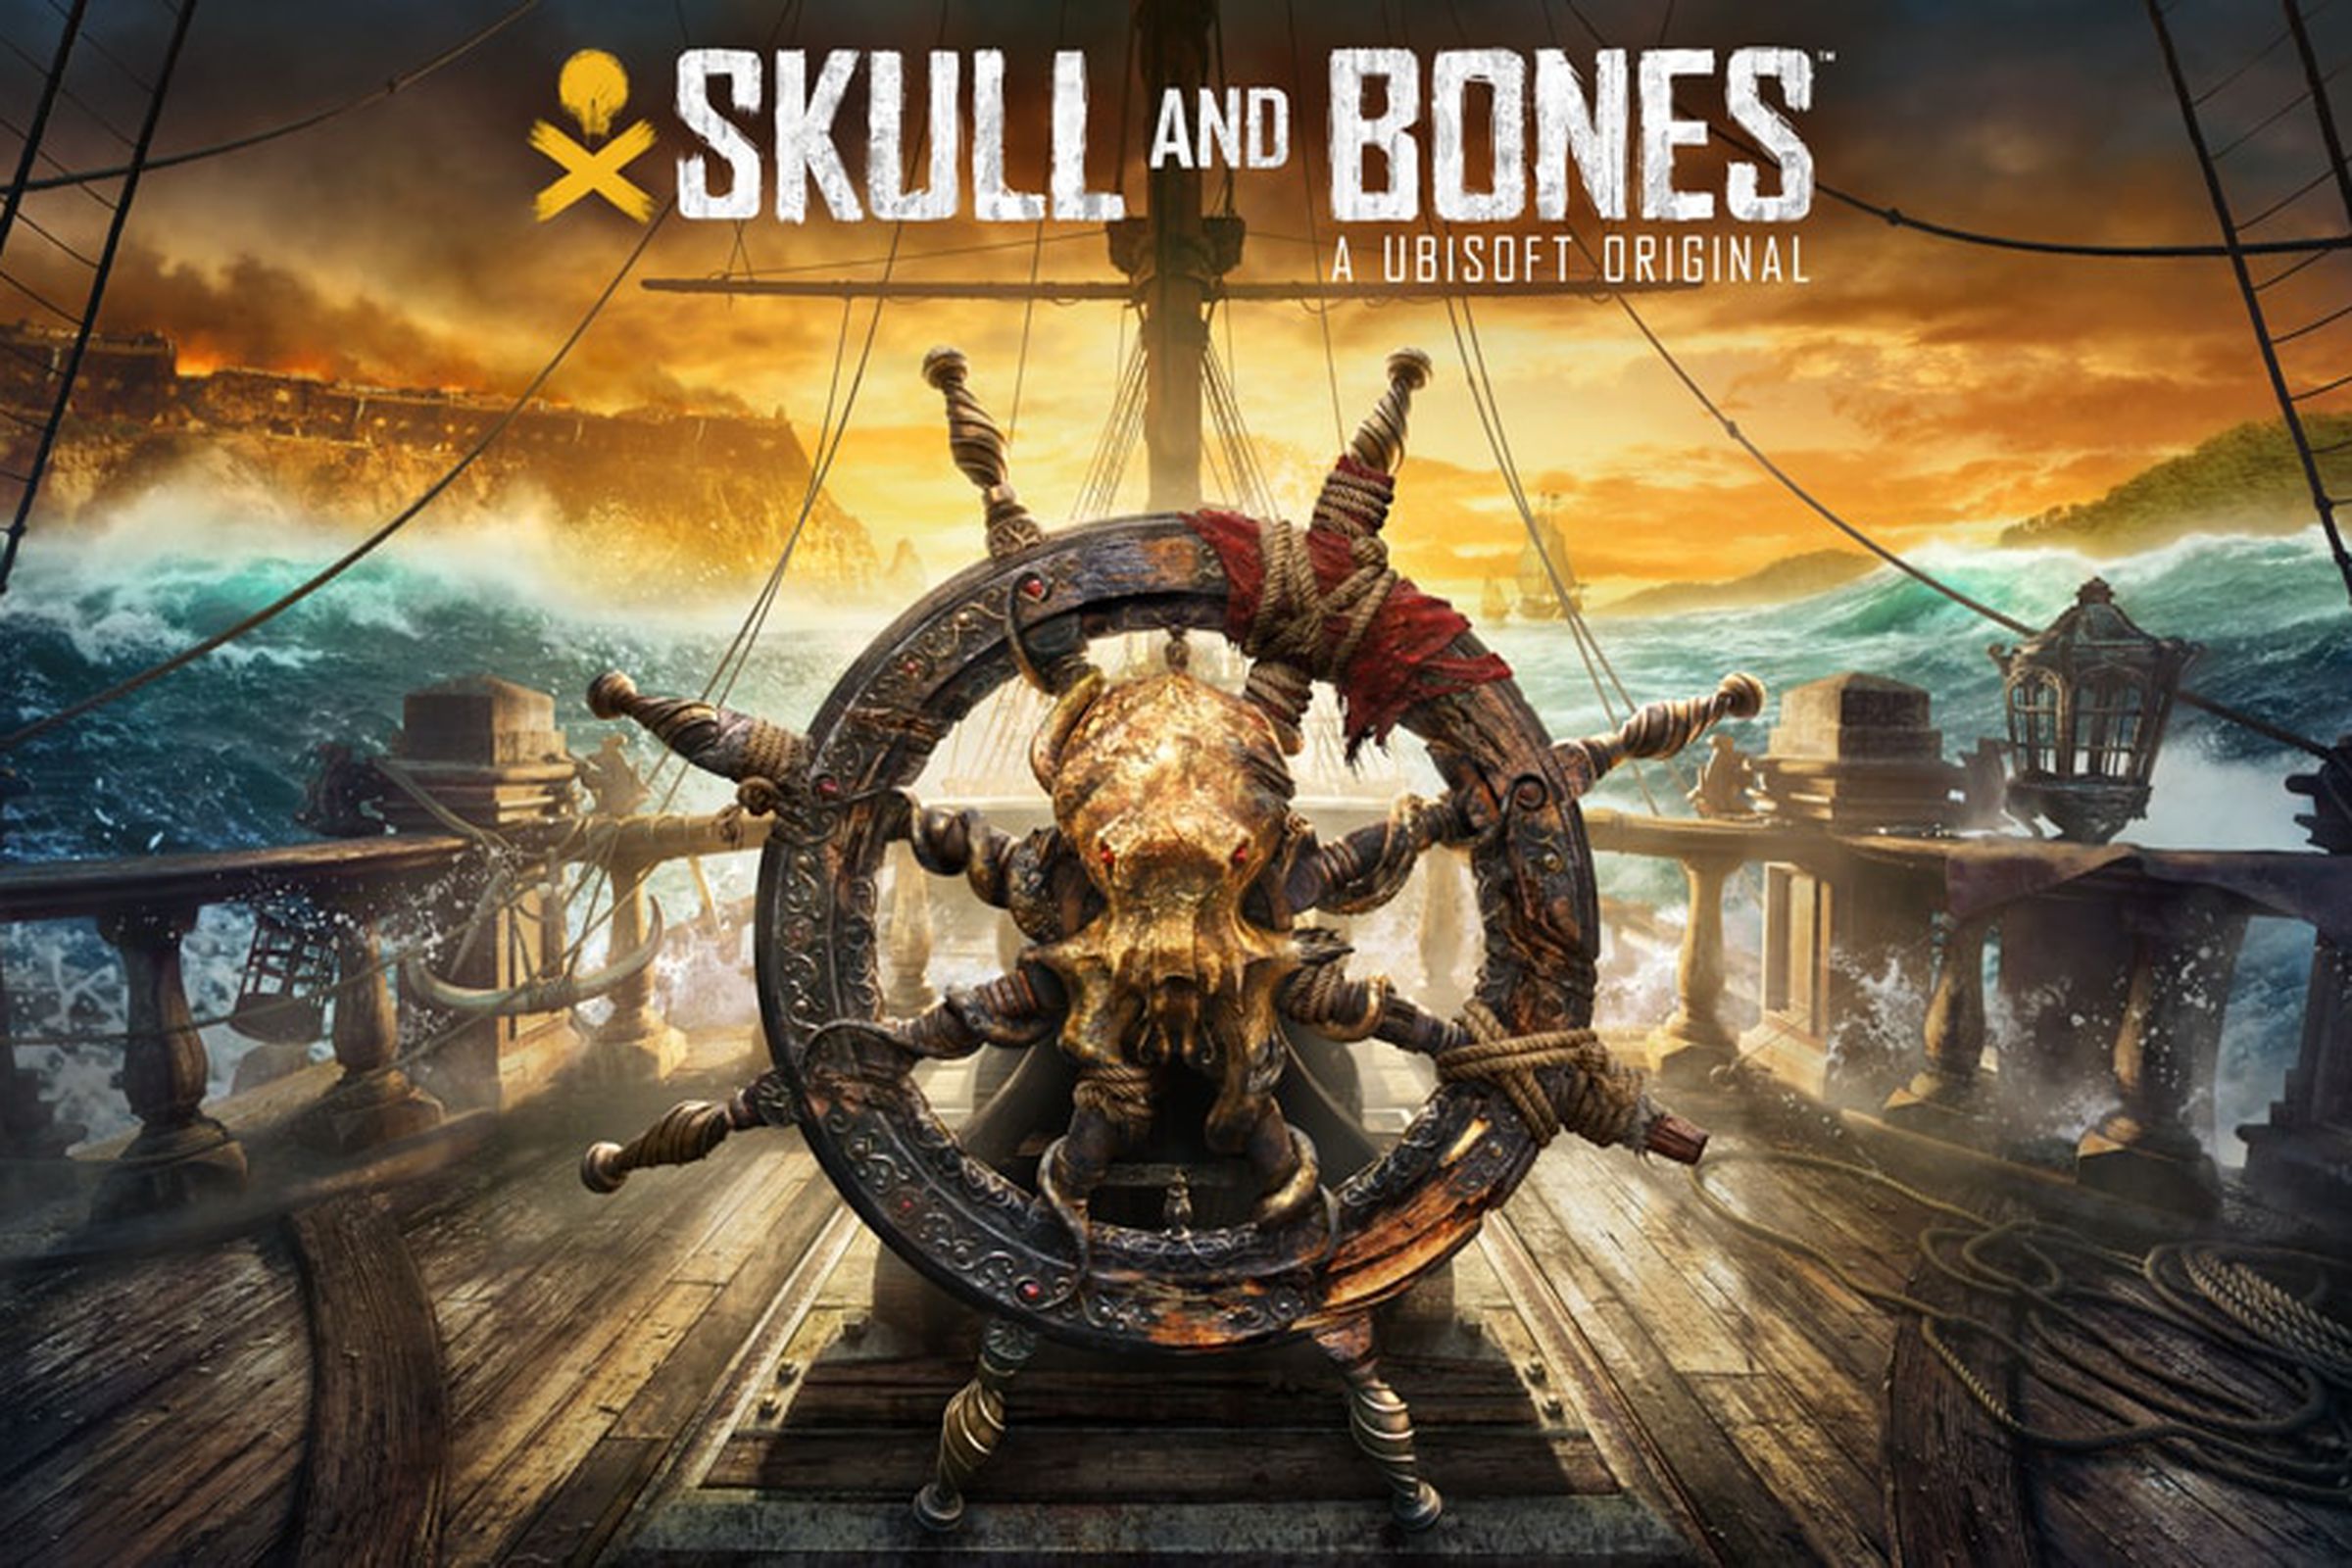 Promotional artwork for Ubisoft’s Skull and Bones featuring an image of a ship’s navigation wheel adorned with the skull of a deep sea creature with the words “Skull and Bones, an Ubisoft Original” overhead